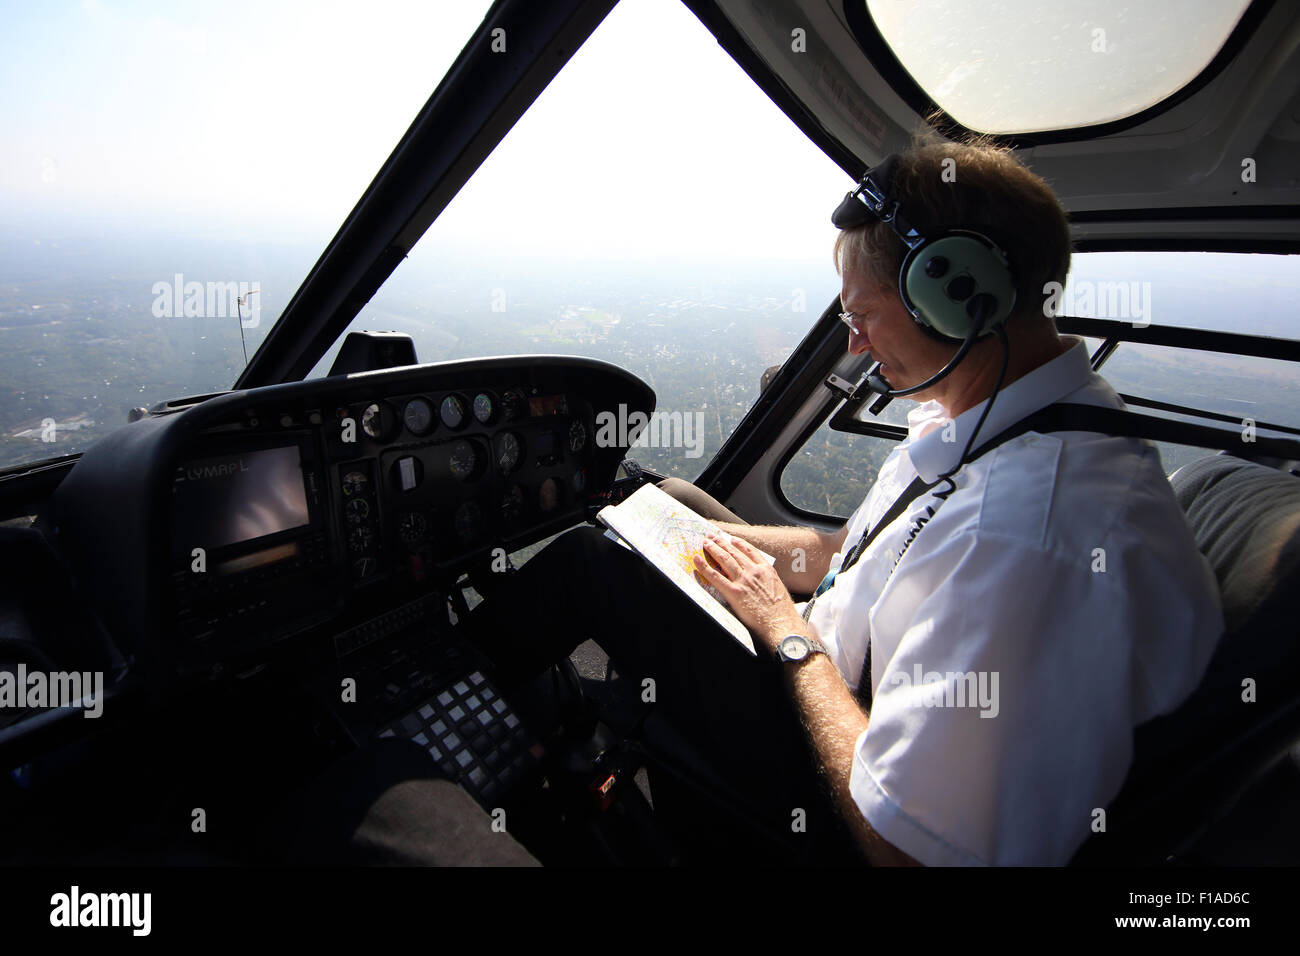 Strausberg, Germany, helicopter pilot during a flight in the cockpit Stock Photo